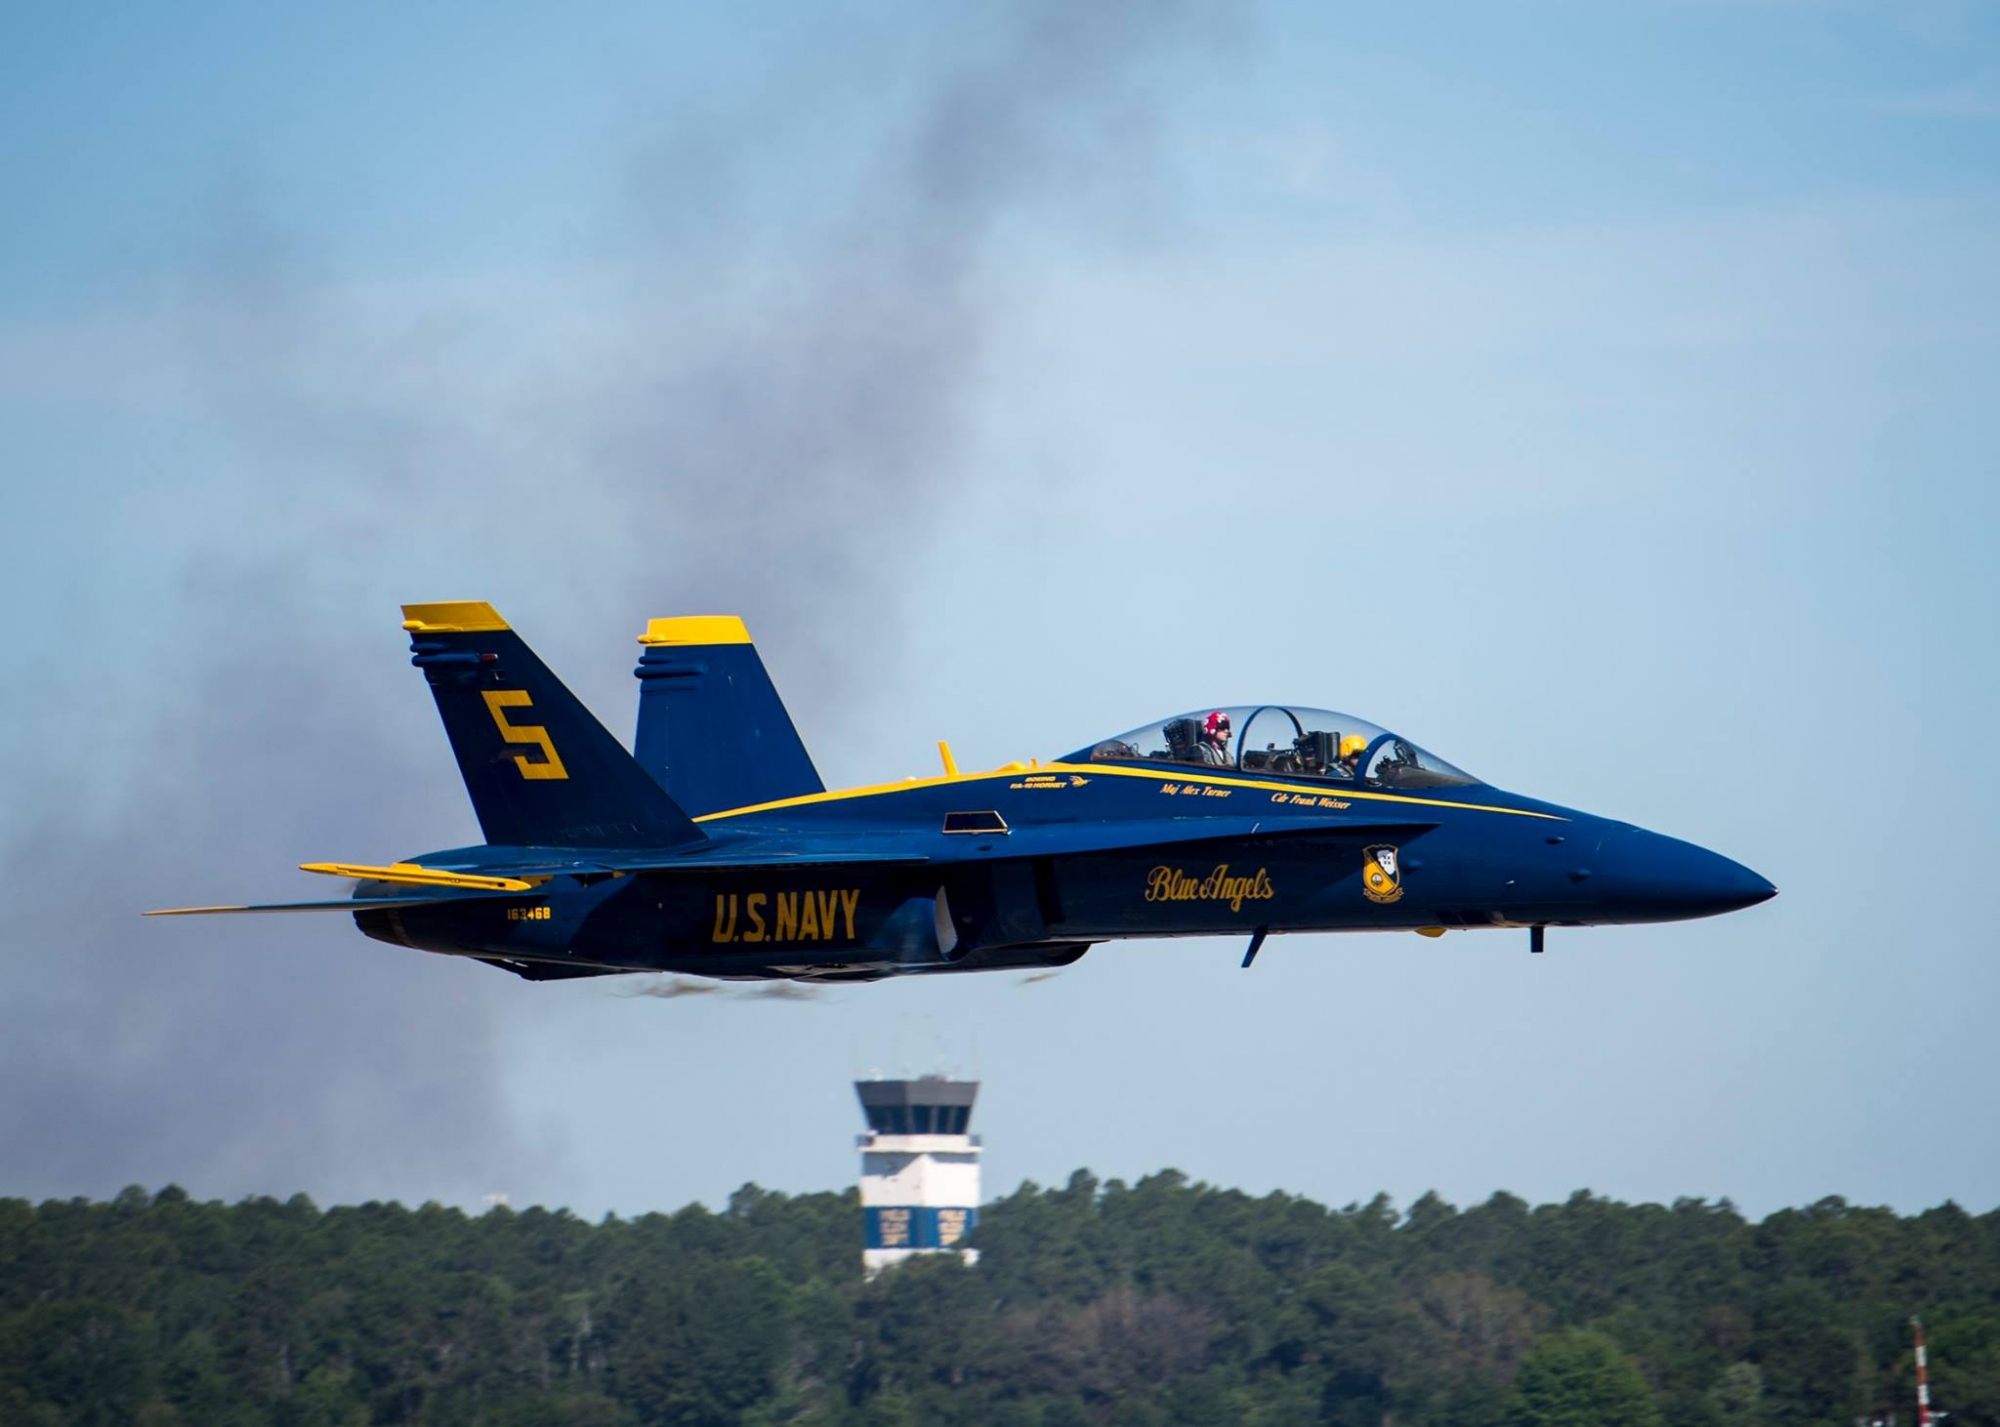 Thunderbirds and Blue Angels reunion at Pensacola